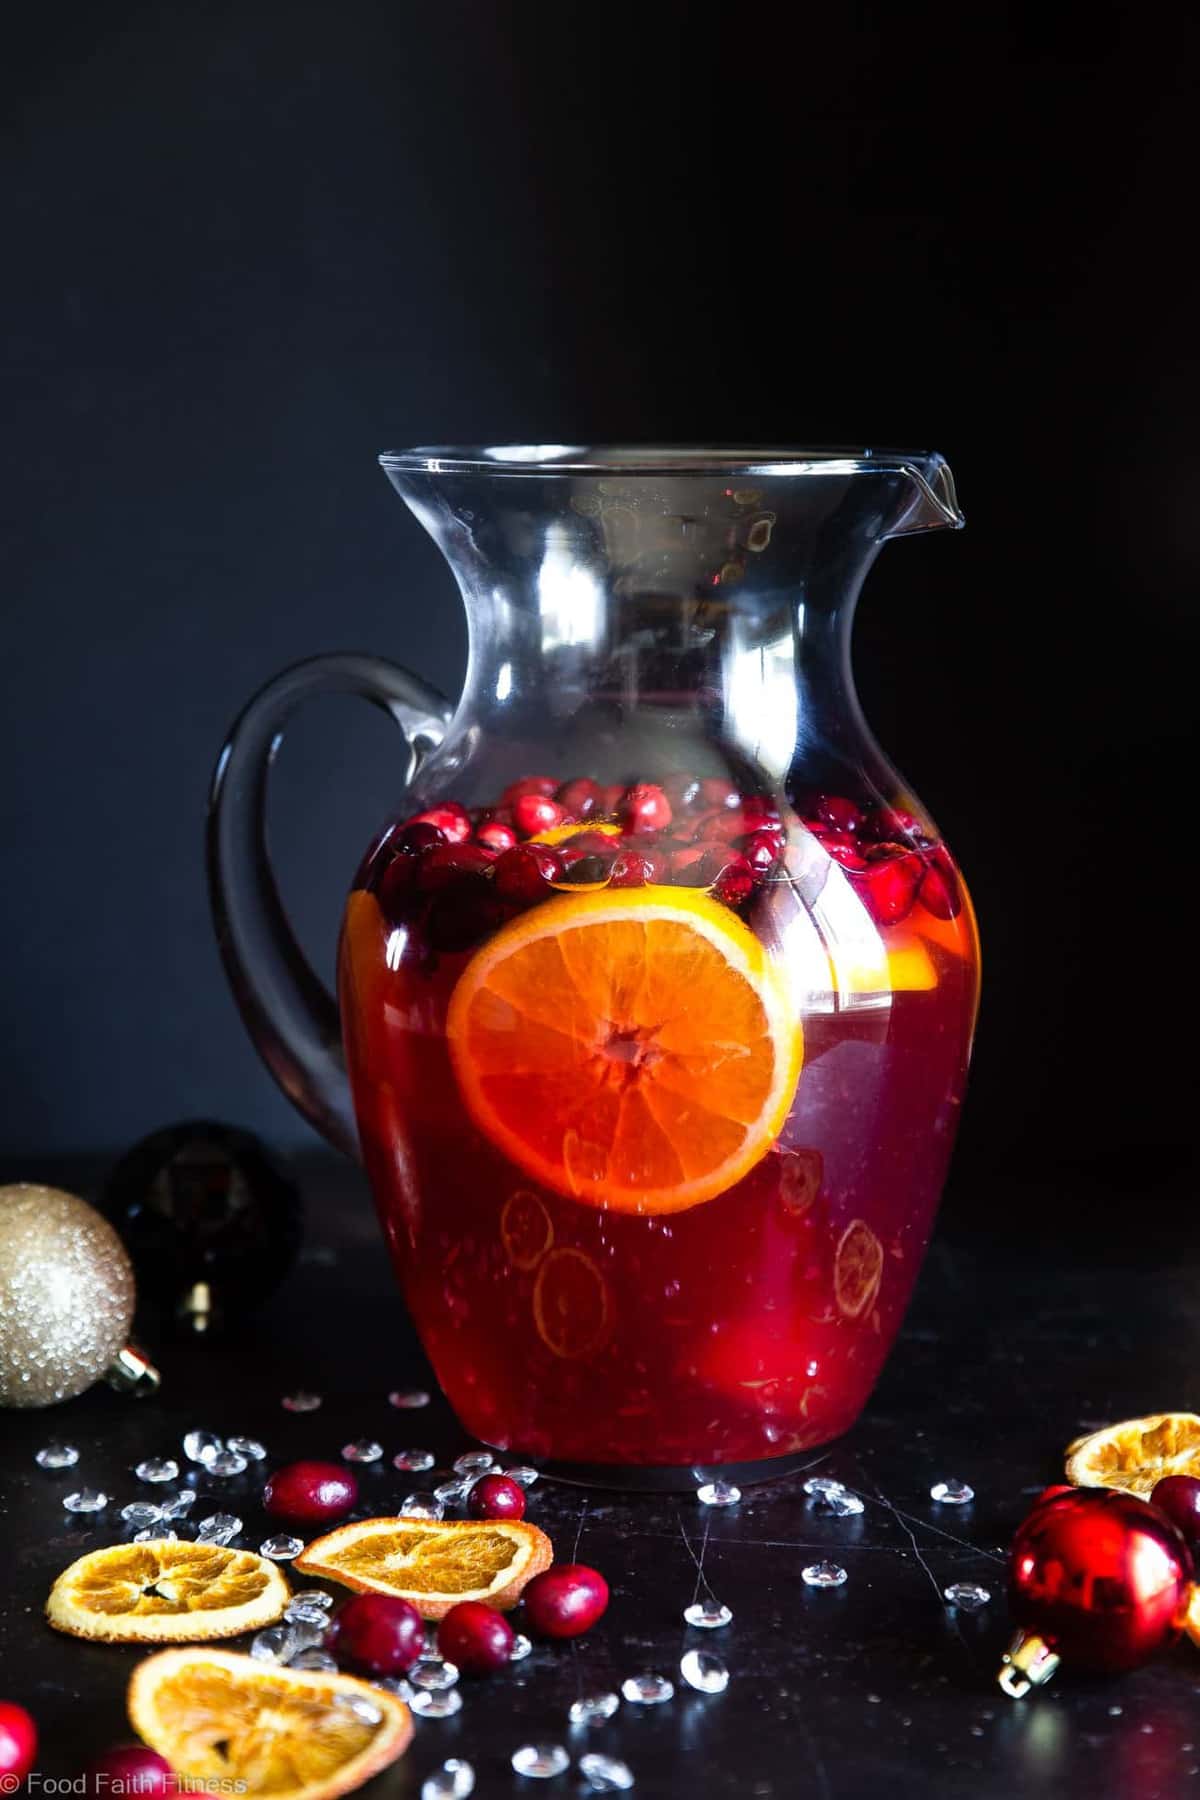 Sparkling Holiday Champagne Sangria - Full of tart cranberries and sweet oranges, this is an easy, better-for-you cocktail that is perfect to serve a crowd this Holiday season! Fizzy, festive and tasty! | #Foodfaithfitness | #Glutenfree #Sangria #Dairyfree #Vegan #Champagne